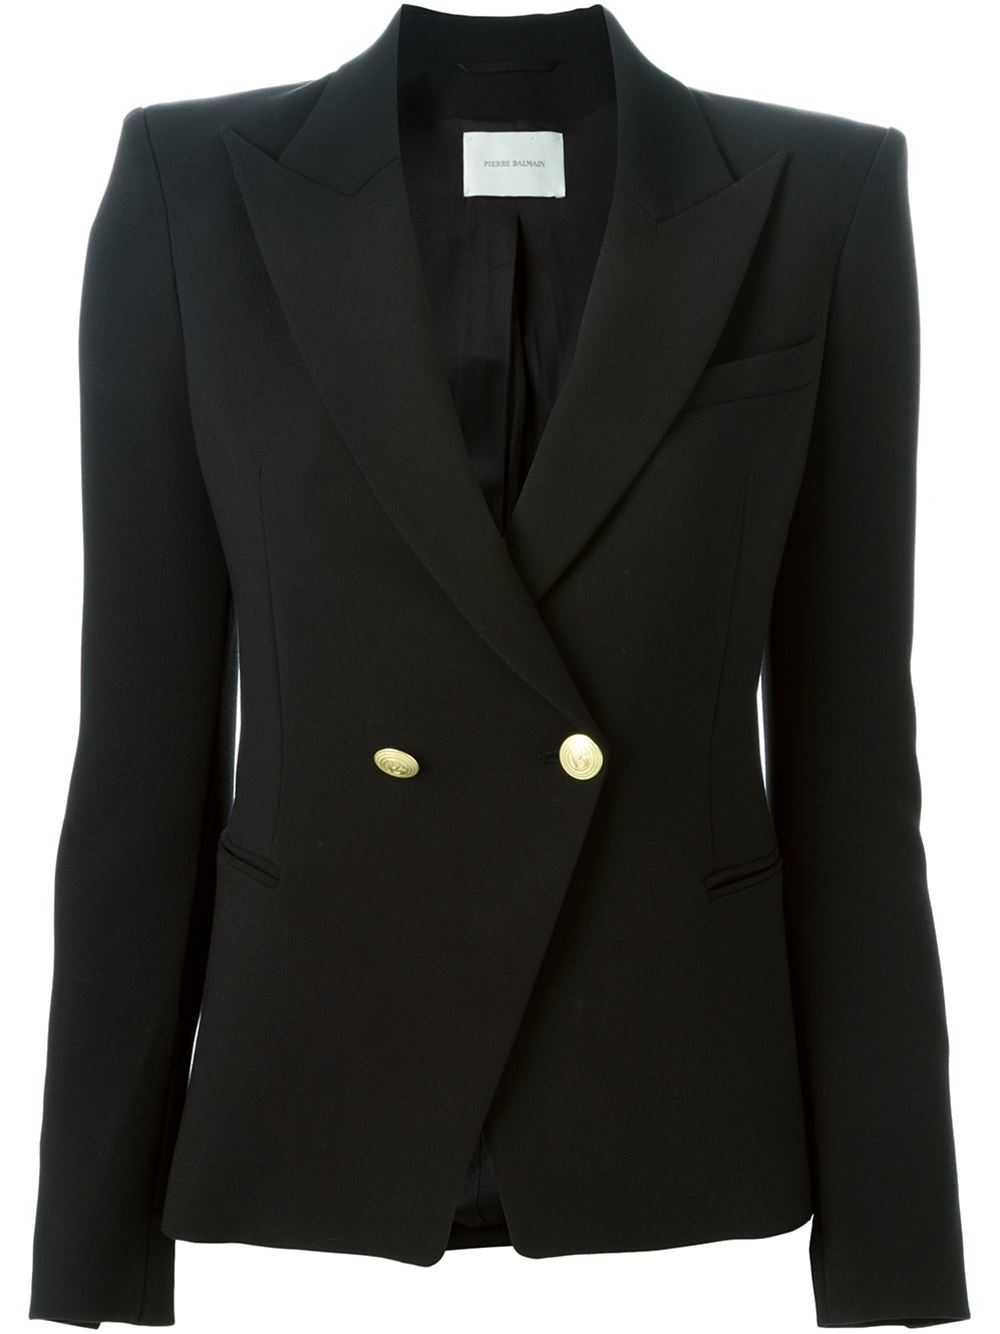 Balmain Jacket With Silver Buttons in Black - Lyst